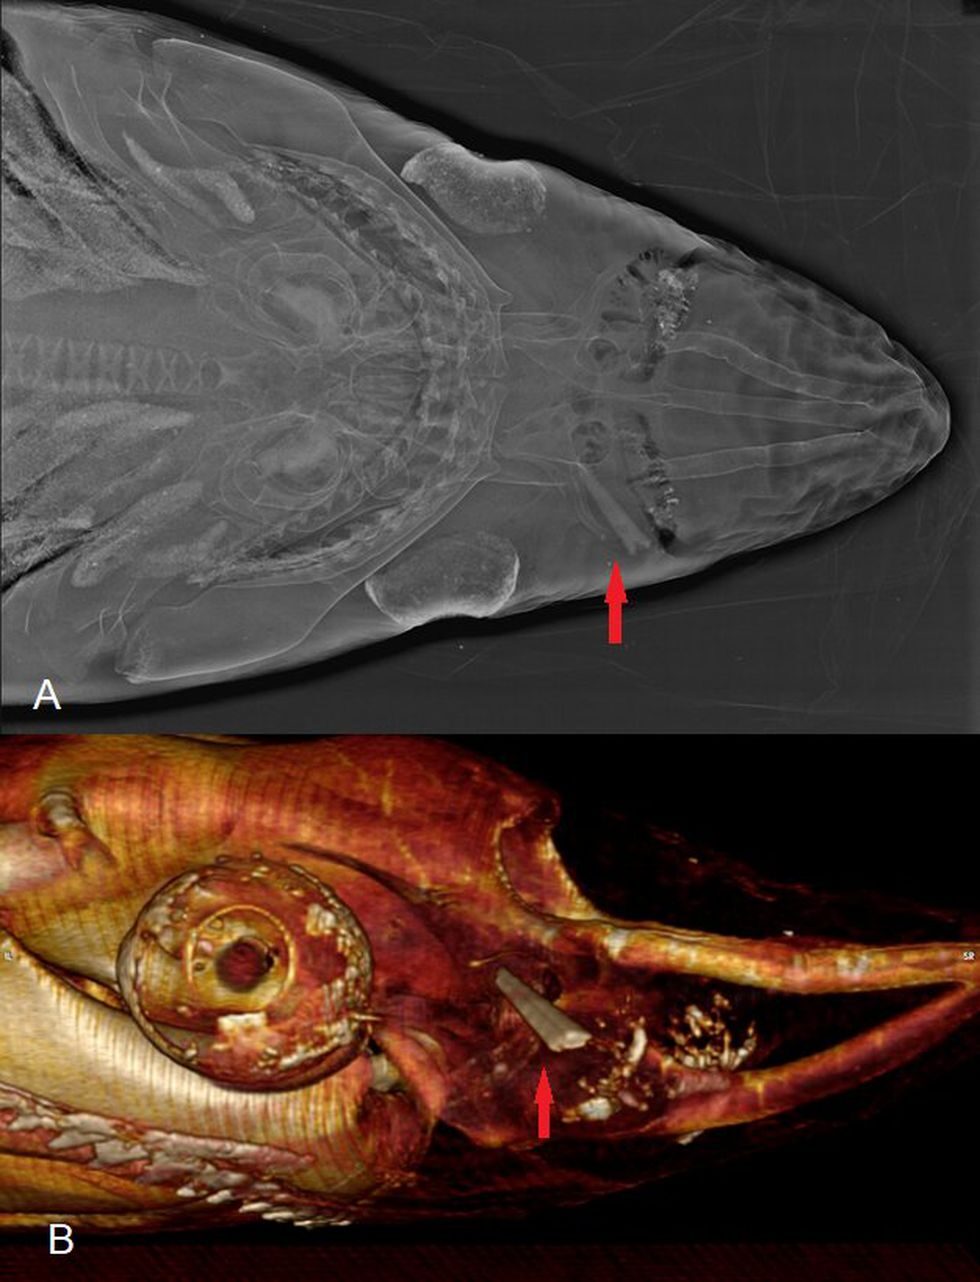 Above: X-ray of a specimen found in Vera in Almería. Below: Lateral view of the wound using computed tomography. The red arrow points to the tip of the swordfish’s blade